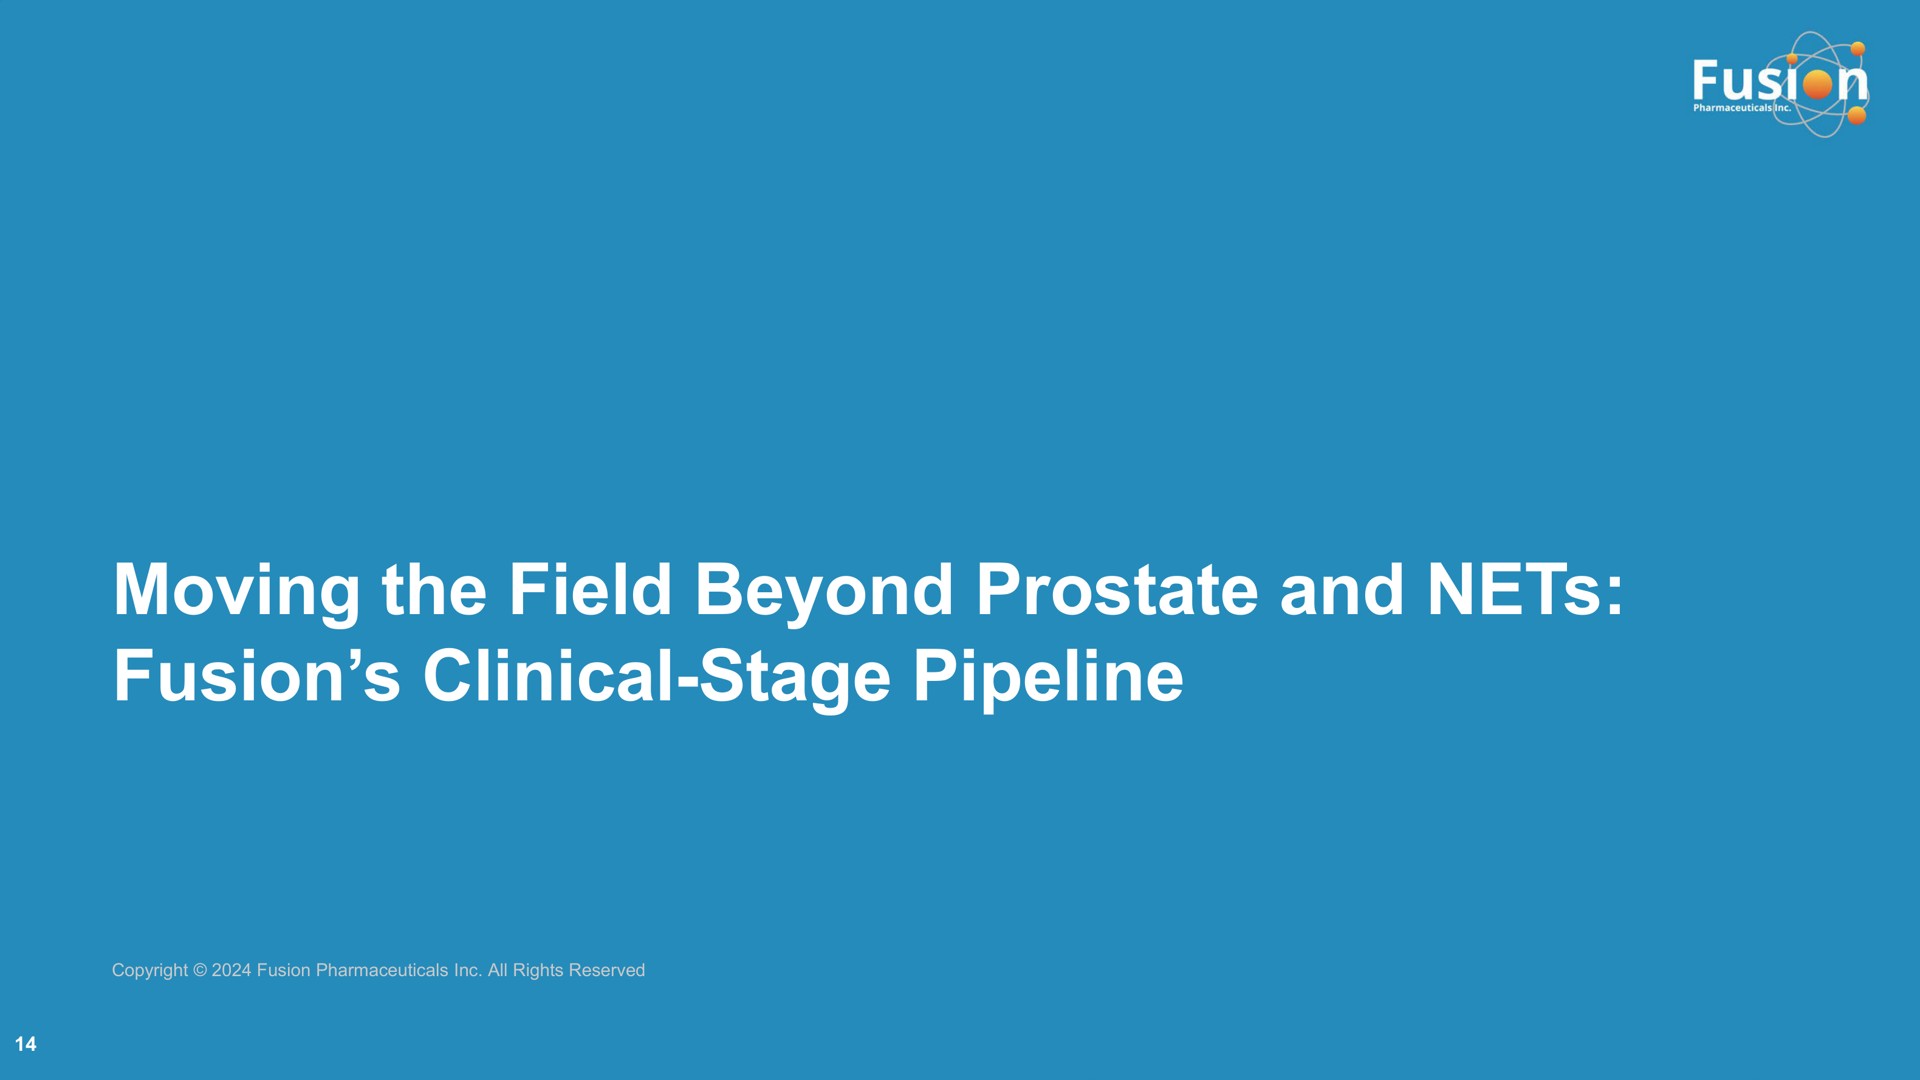 moving the field beyond prostate and nets fusion clinical stage pipeline | Fusion Pharmaceuticals